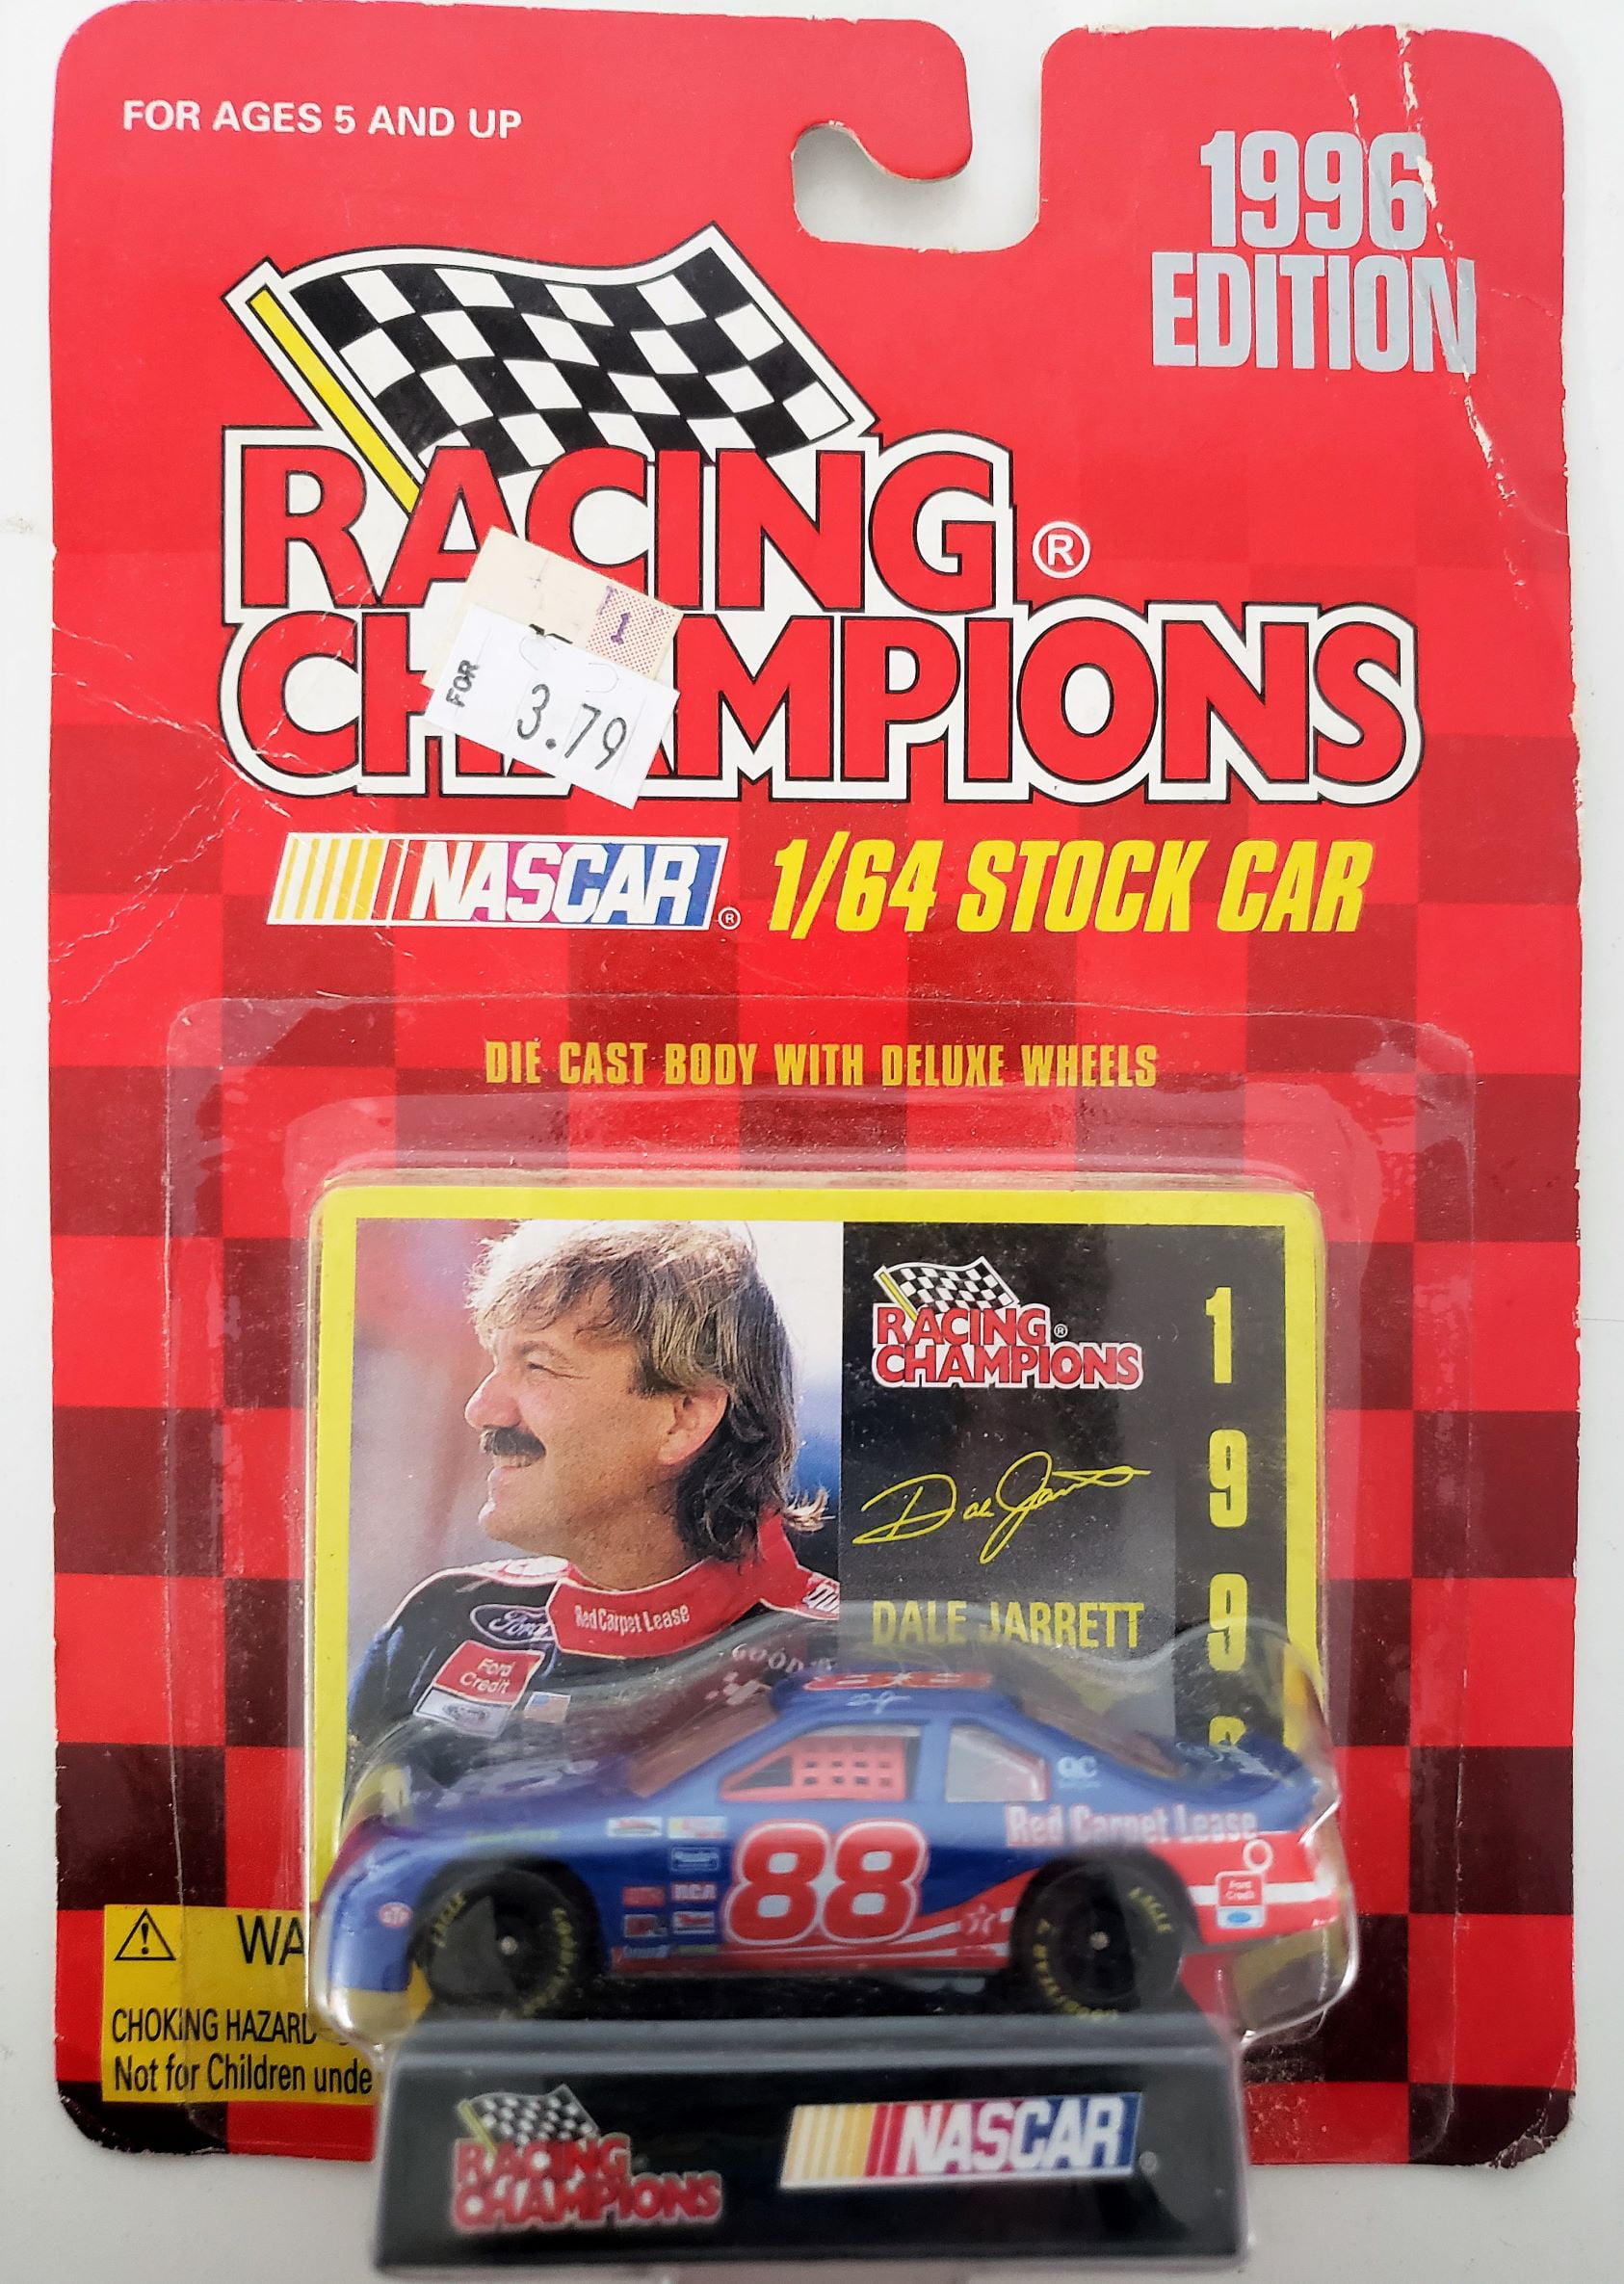 NASCAR #88 Dale Jarret Quality Care Ford Thunderbird 1996 Racing Champions  1:64 Scale Diecast